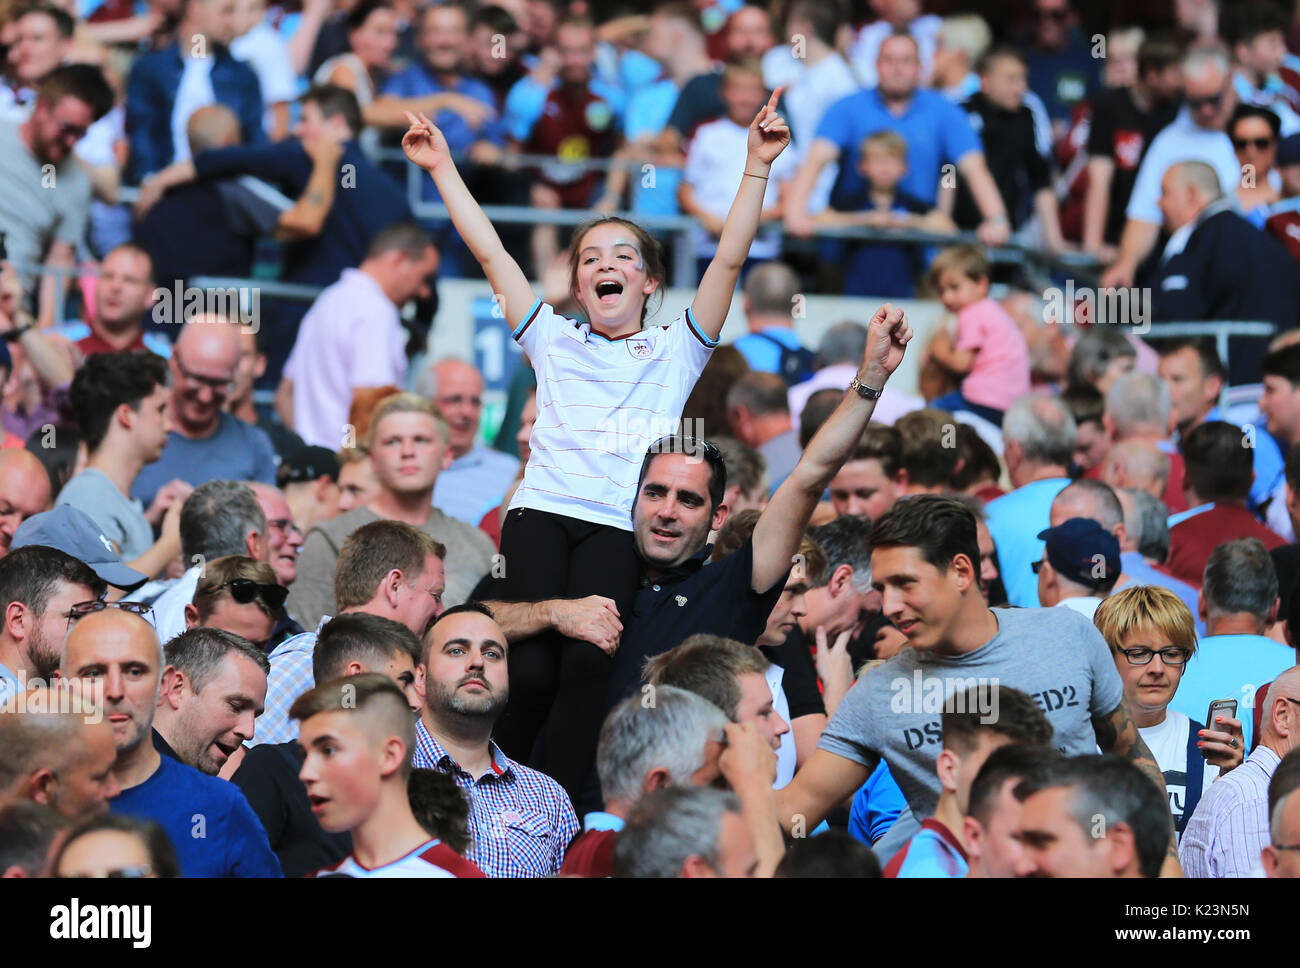 (170827) LONDON, ENGLAND -- Fussball, Premier League: Tottenham Hotspur vs Burnley im Wembley Stadion am 27.08.2017 in London, England. Burnley fans celebrate the draw to Tottenham during the Premier League match between Tottenham Hotspur and Burnley at Wembley Stadium on August 27th 2017 in London, England. | Verwendung weltweit Stock Photo